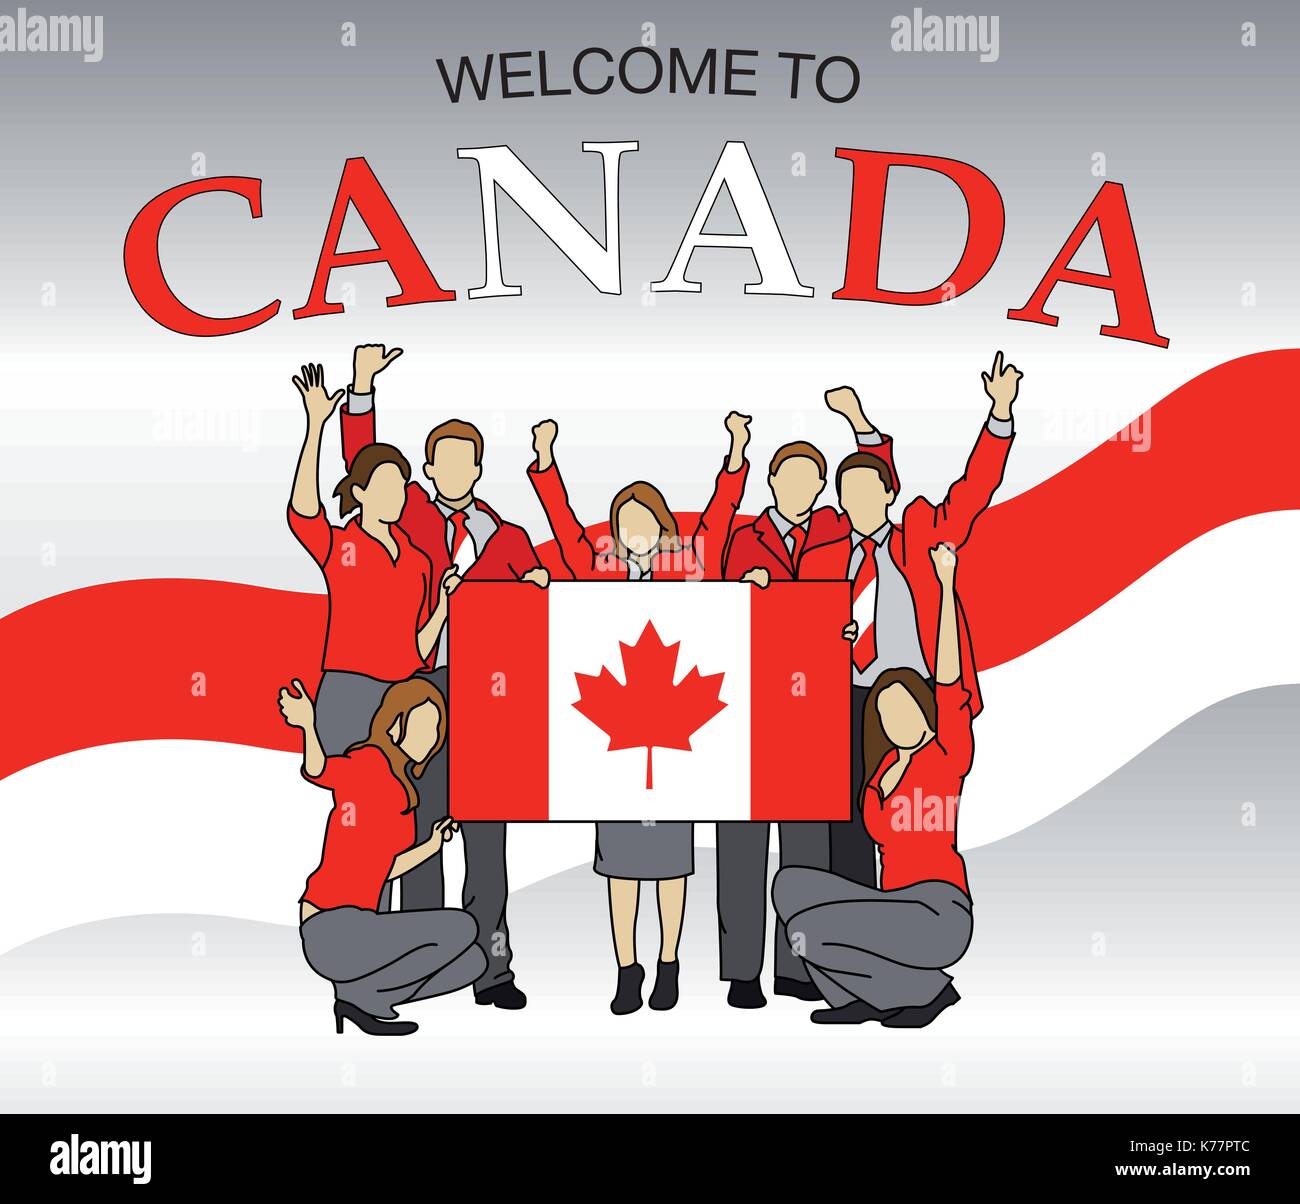 Welcome to Canada. Group of people dressed in the colors of the Canada flag, waving with hands and holding the flag - Vector image Stock Vector